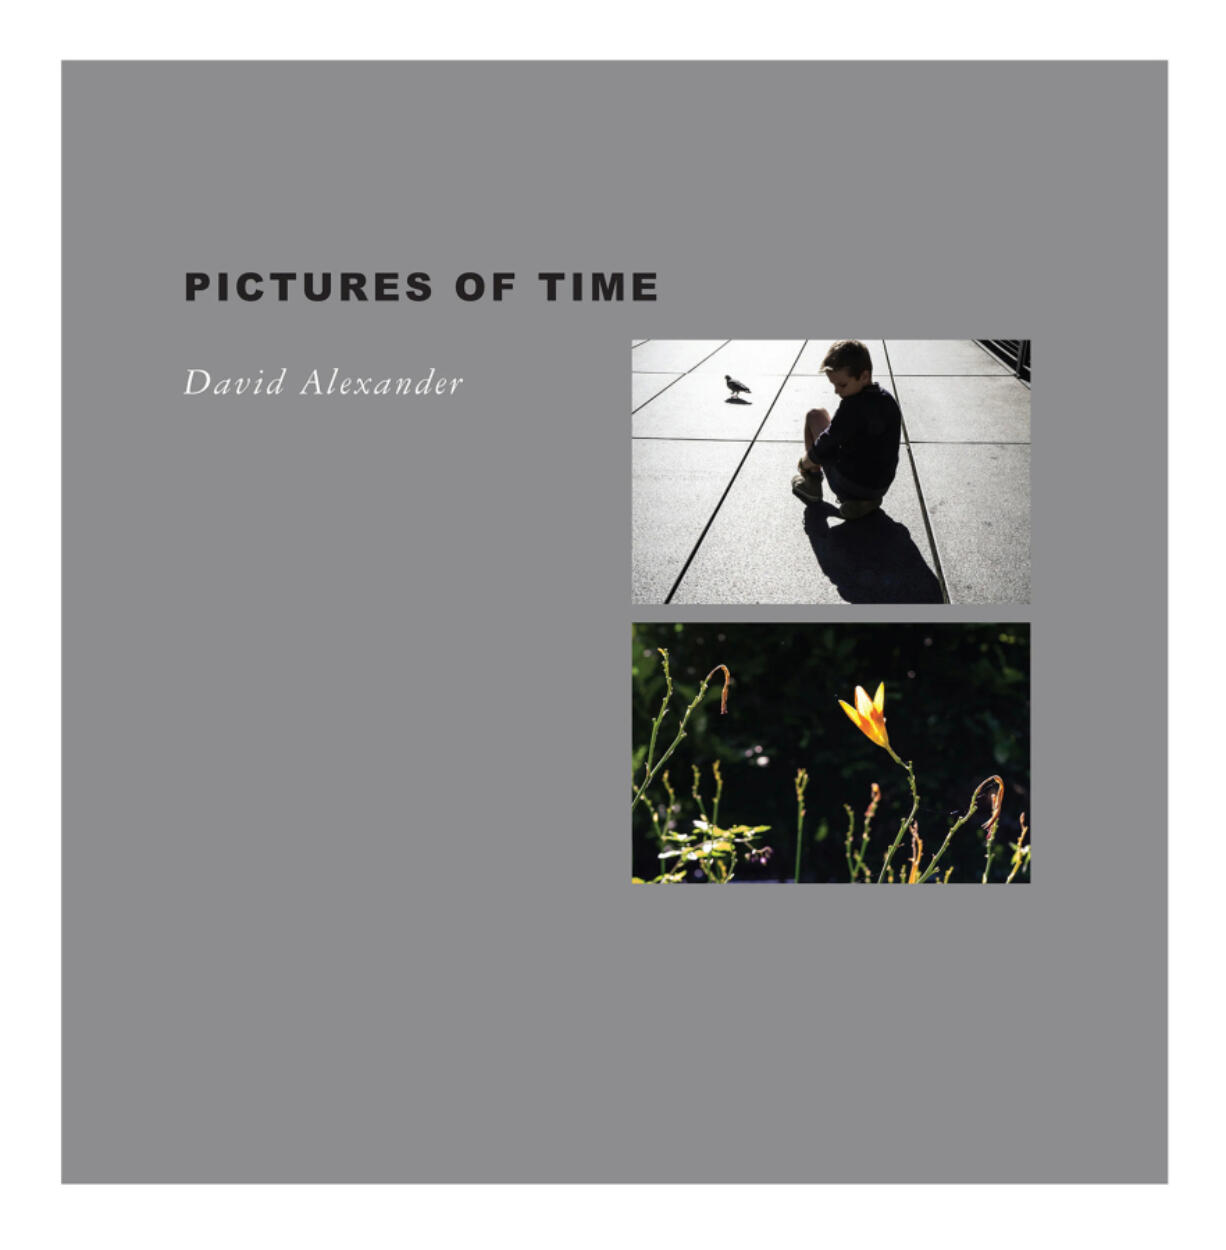 &ldquo;Pictures of Time,&rdquo; by David Alexander.